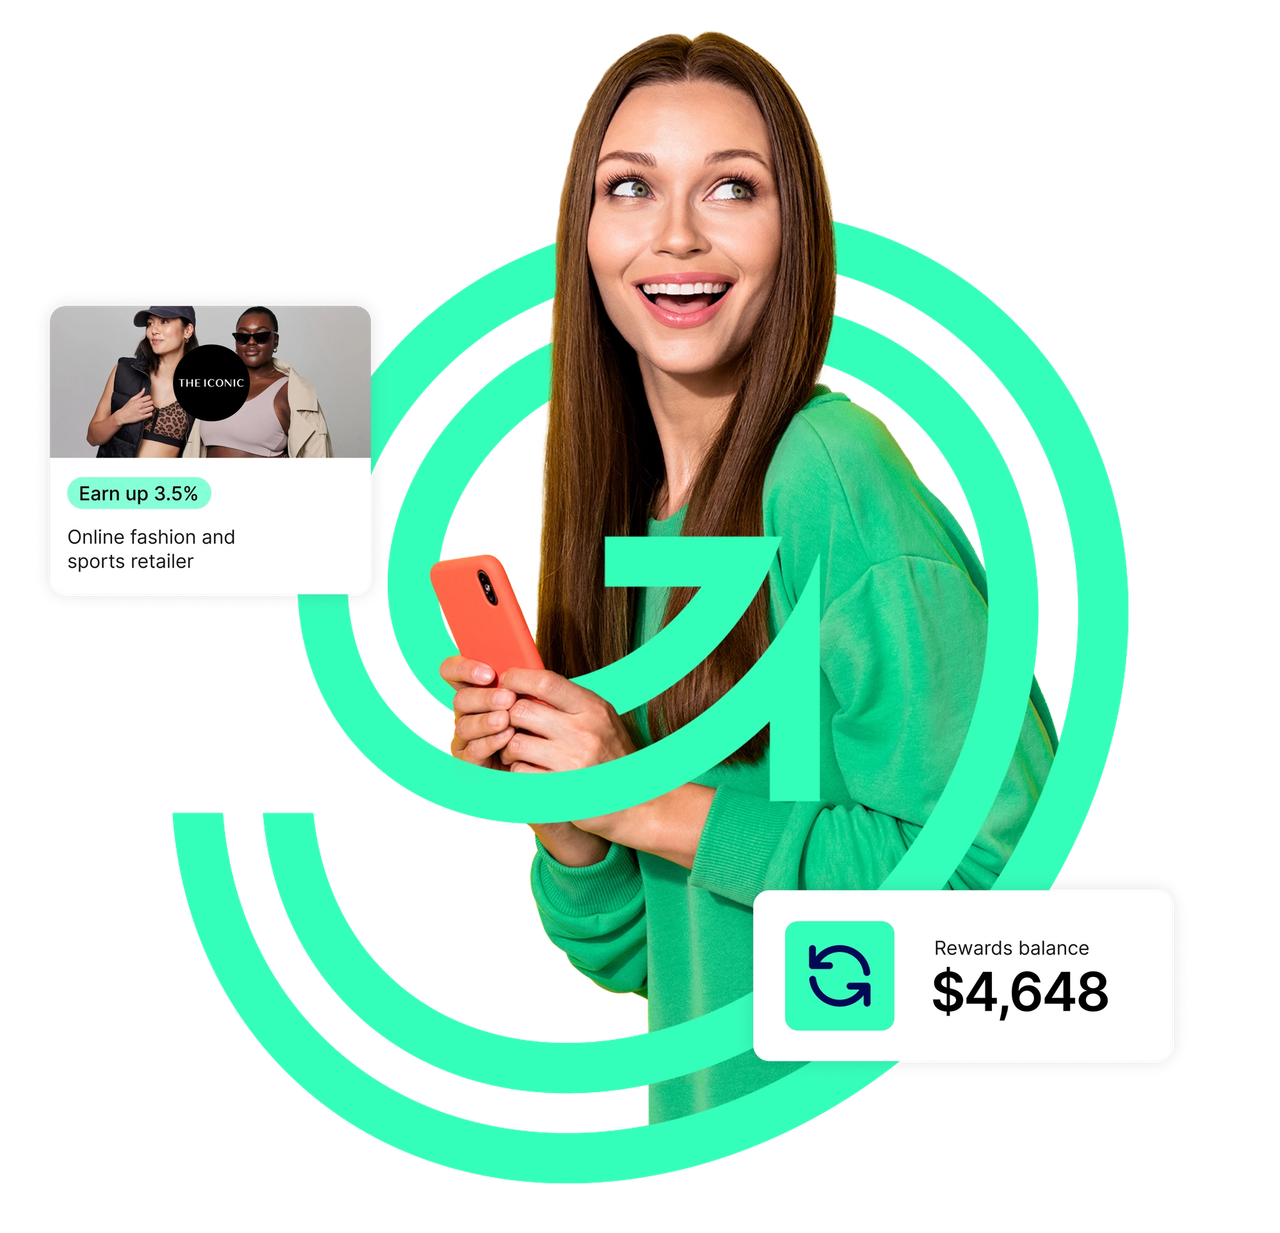 Smiling woman using the Grow My Money app on her phone encircled by the Grow My Money logo